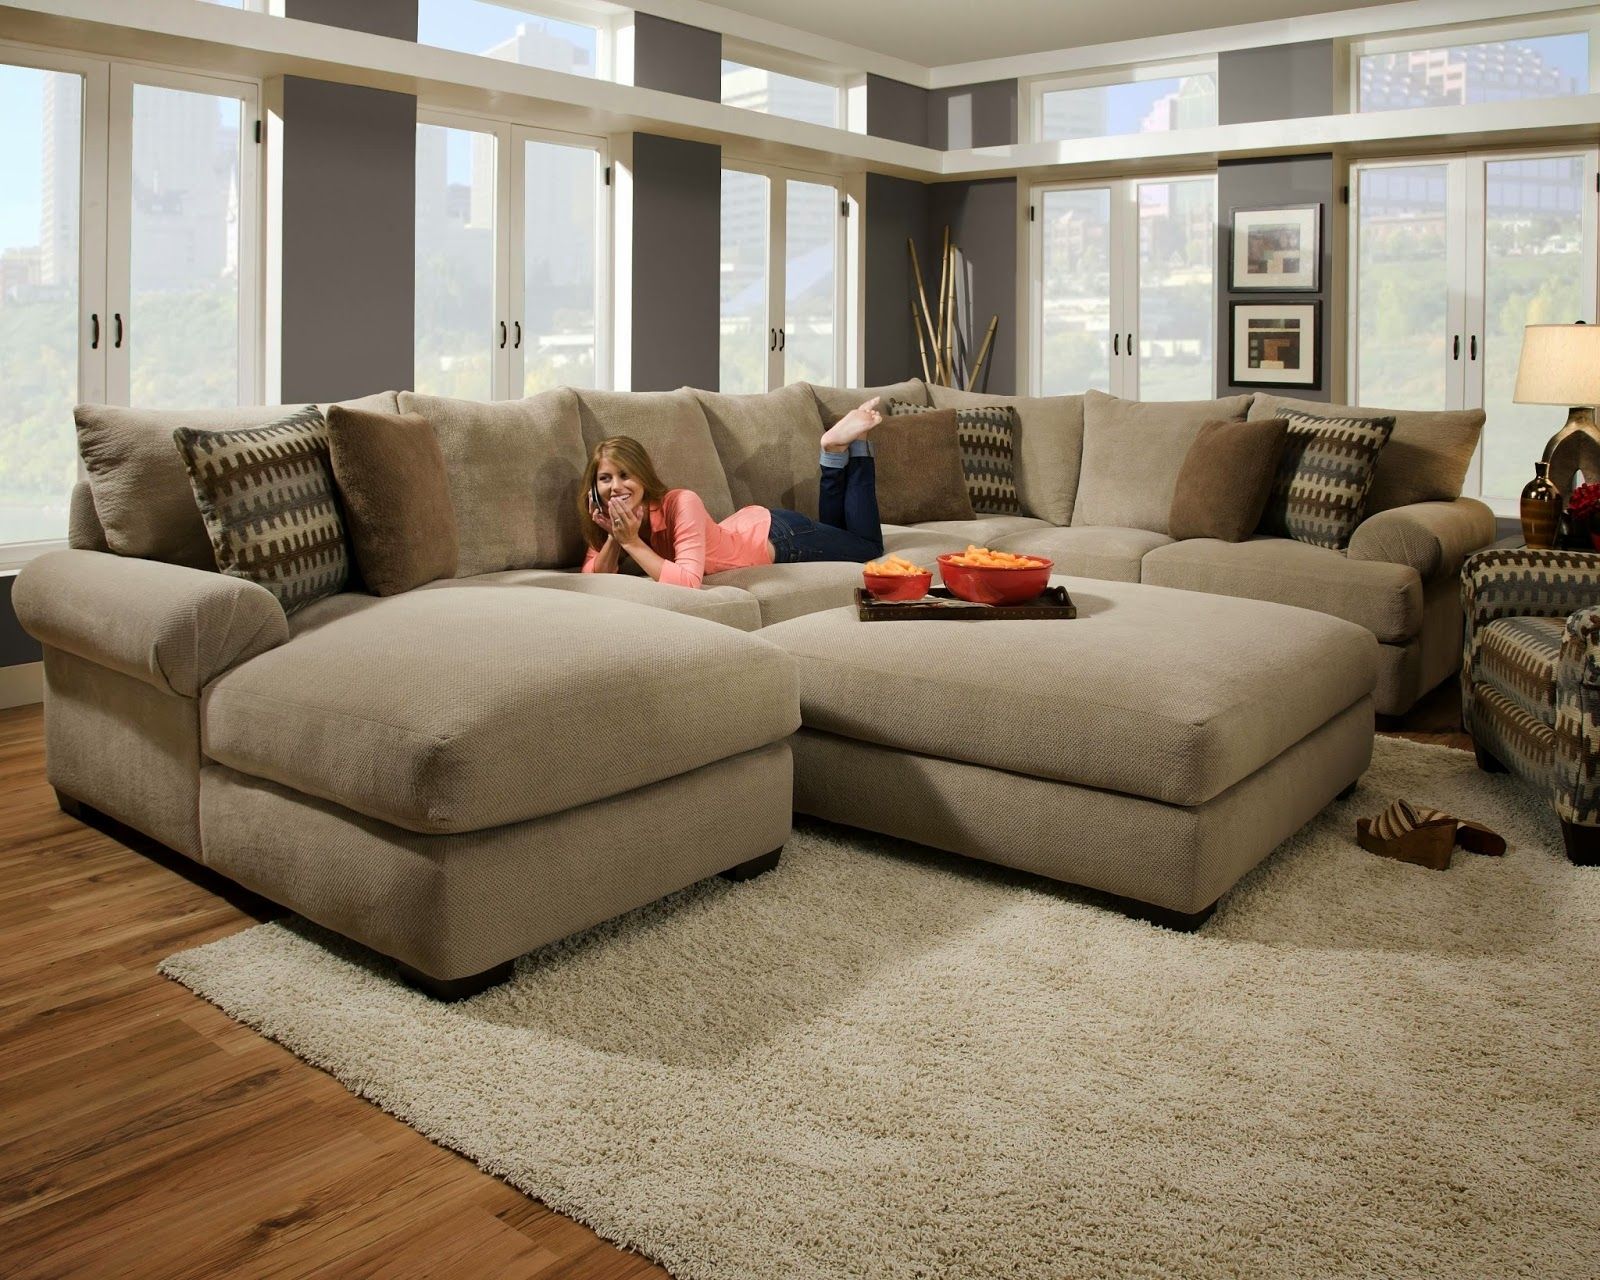 Sectional Sofa With Ottoman – Foter Inside Sofas With Ottomans (View 3 of 15)